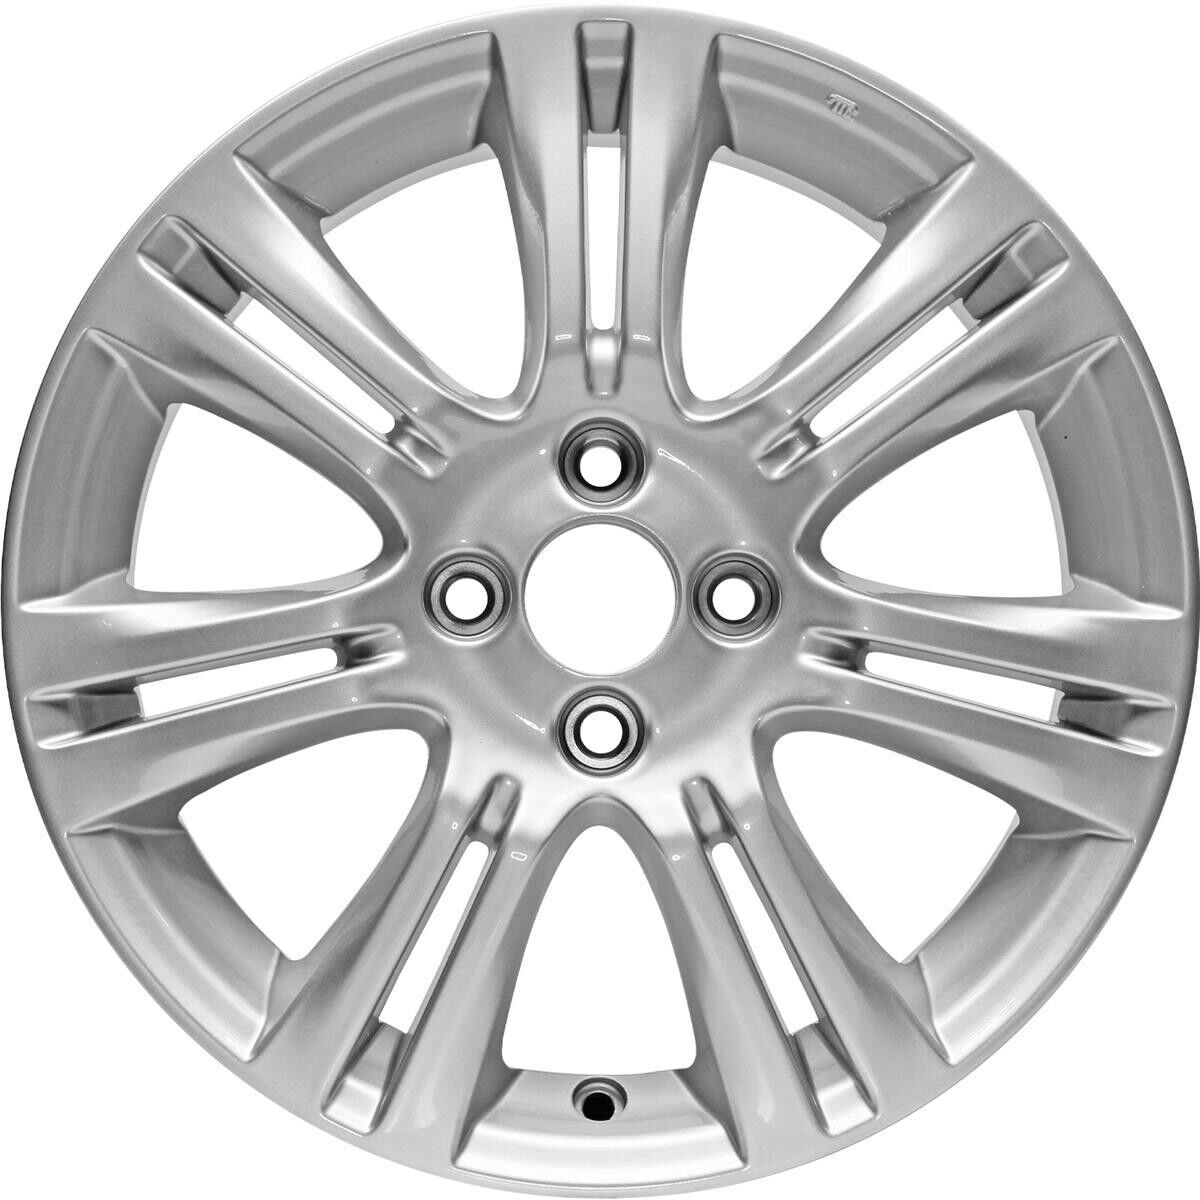 Replacement New Alloy Wheel For 2009-2011 Honda Fit 16X6 Inch Silver Rim